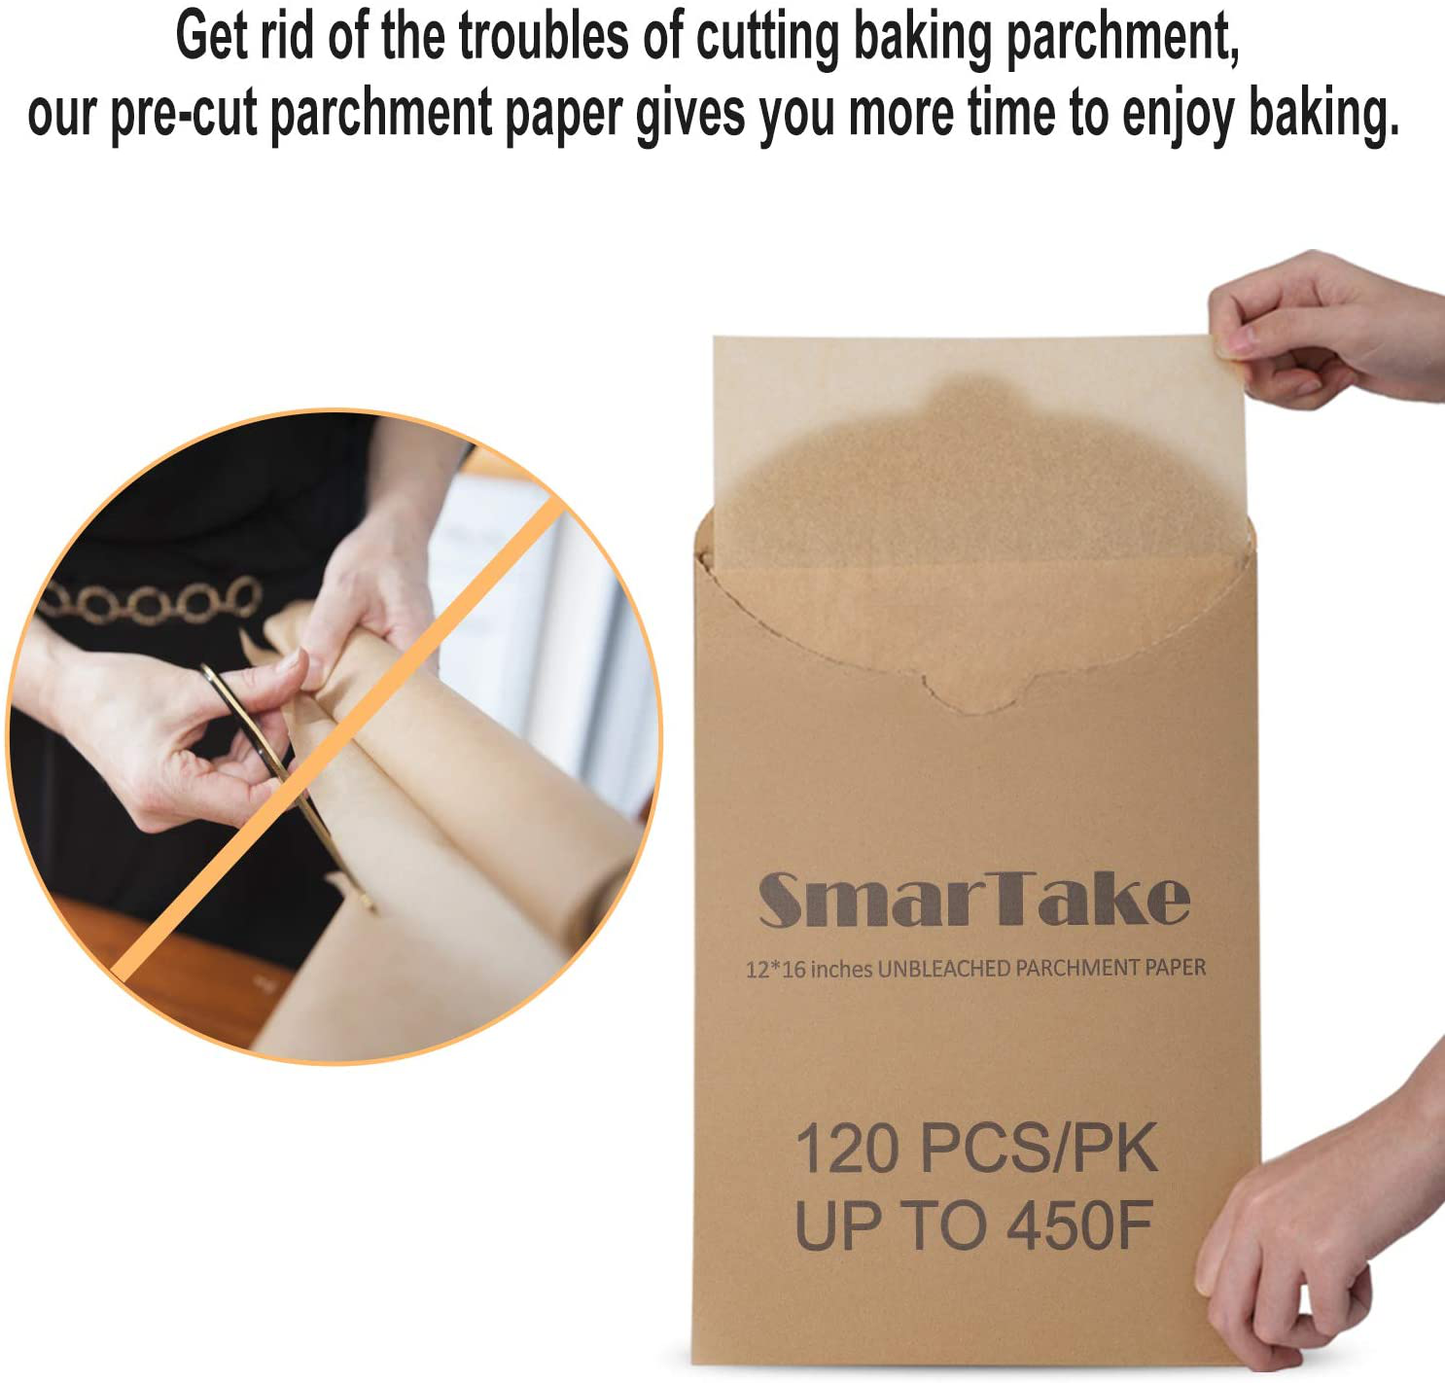 SMARTAKE 120 Pcs Parchment Paper Baking Sheets, 12 x 16 Inches Non-Stick Precut Baking Parchment, Suitable for Baking Grilling Air Fryer Steaming Bread Cup Cake Cookie and More (Unbleached)